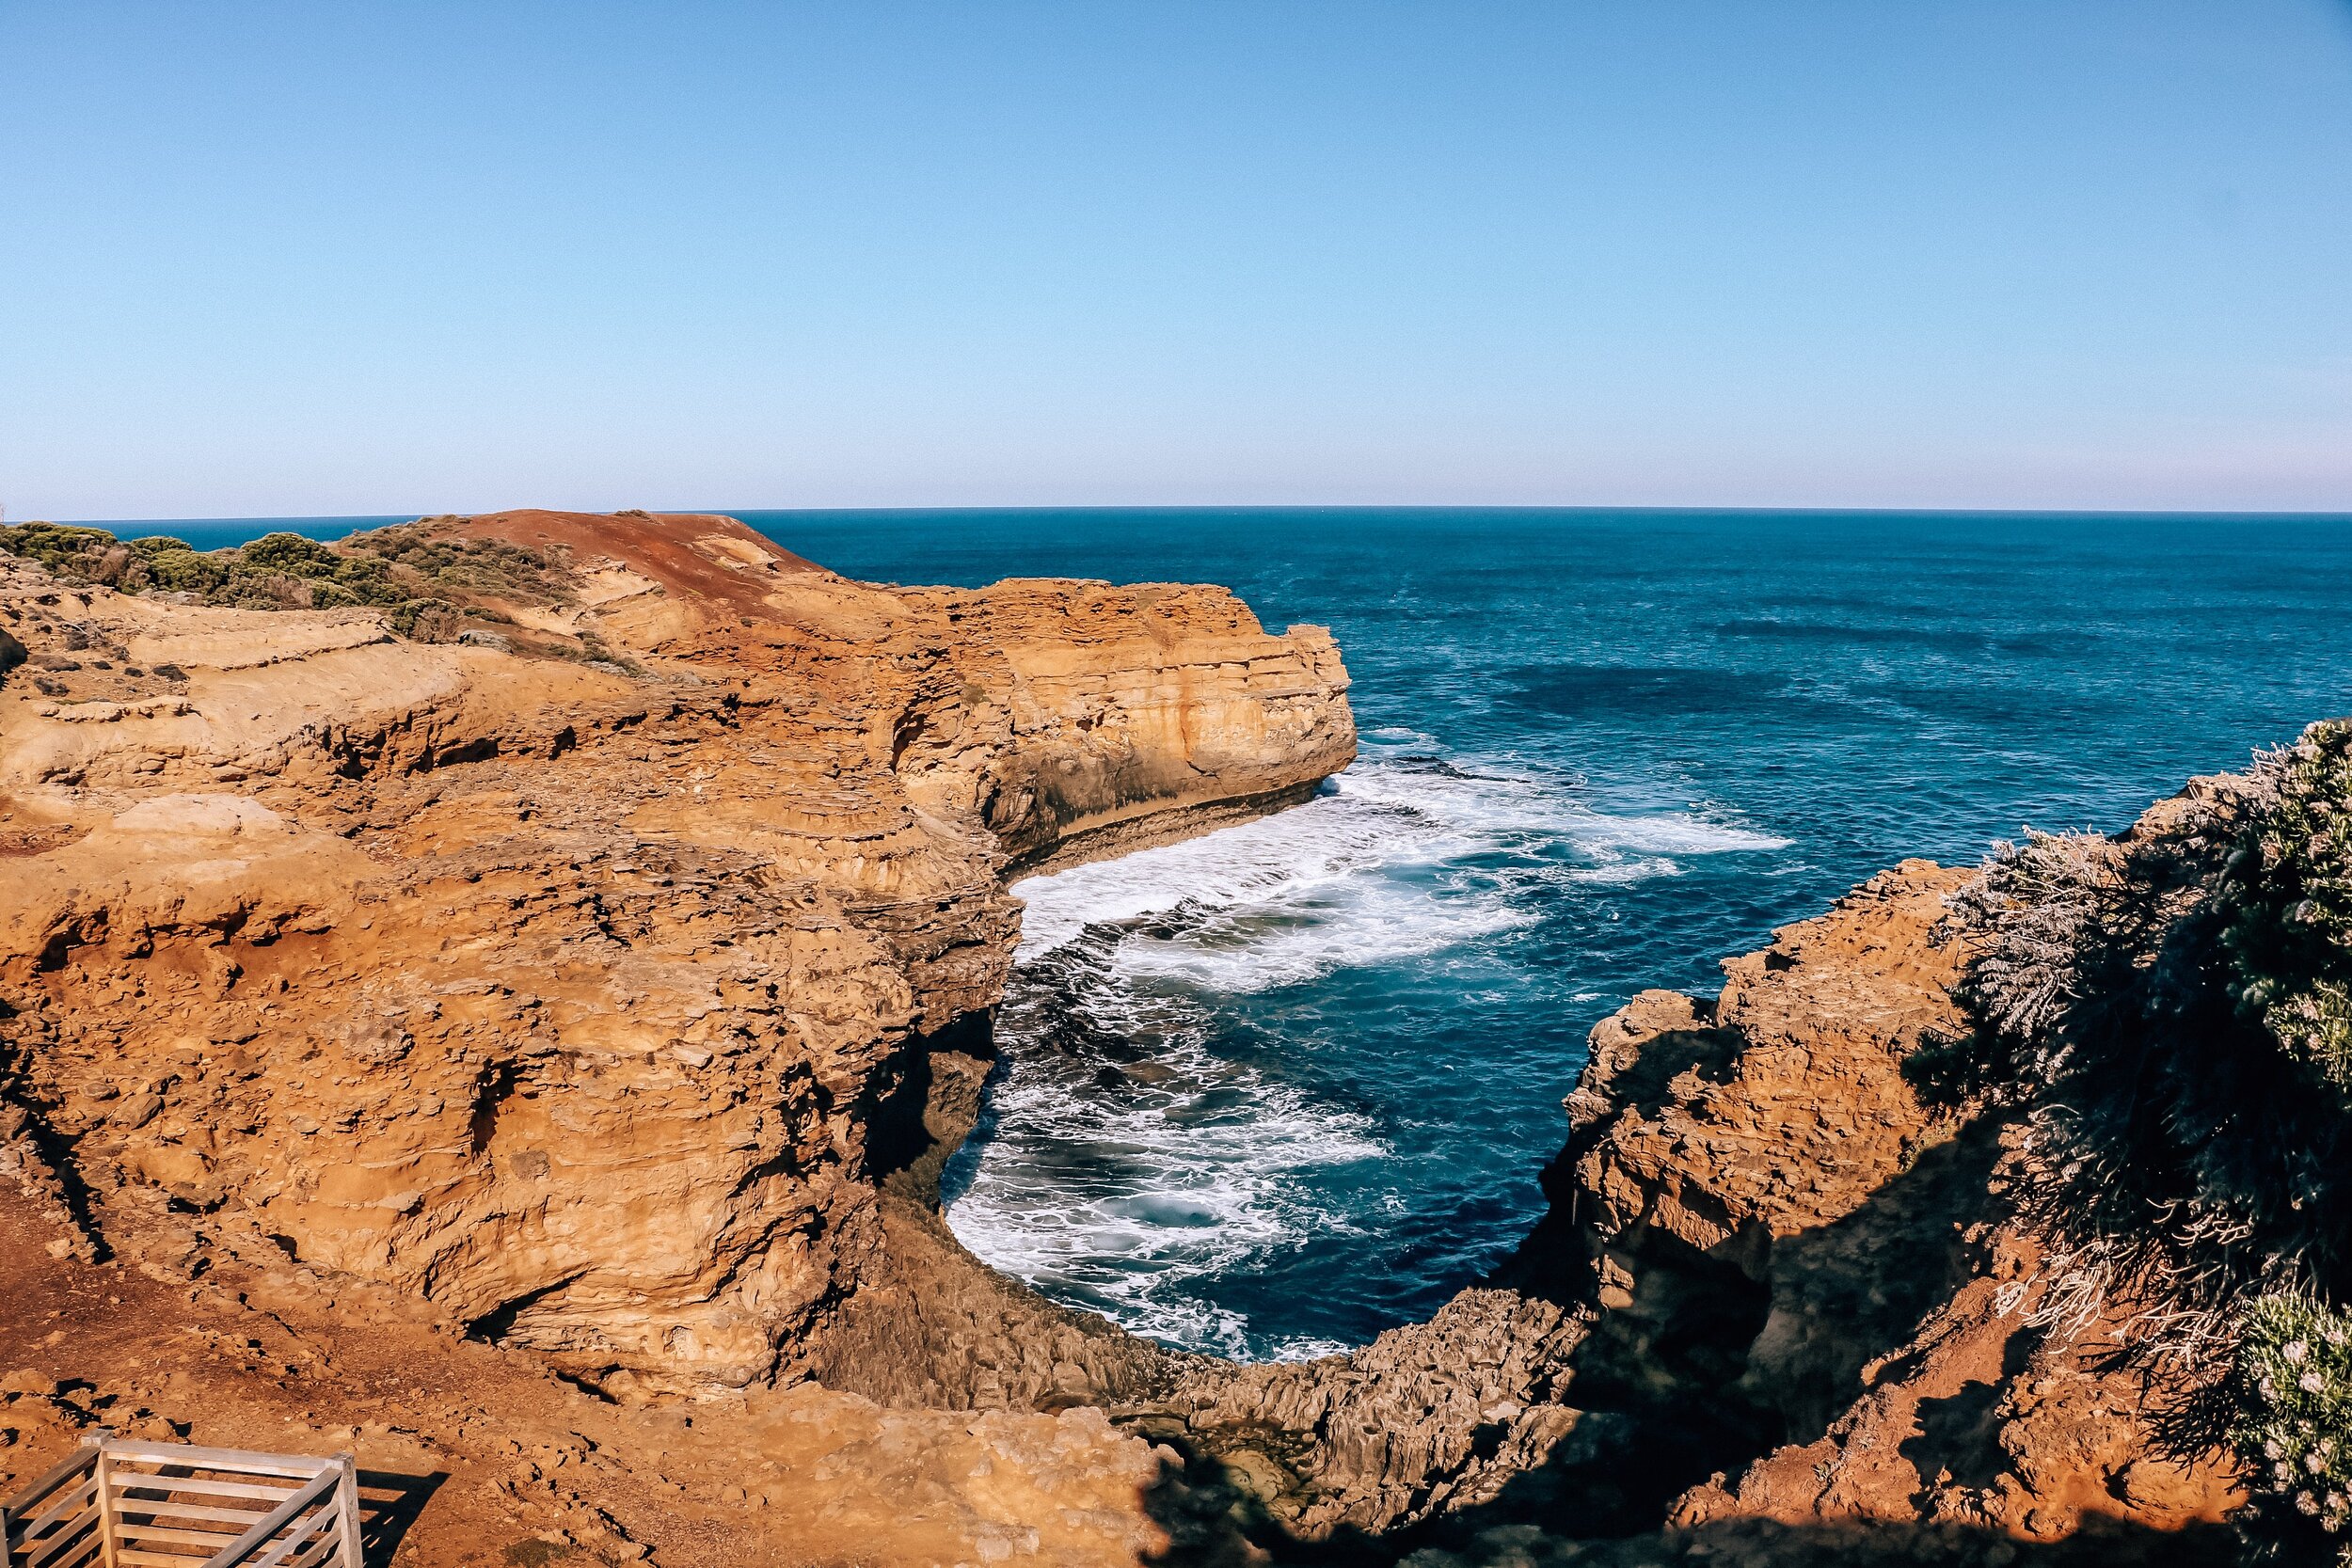 The Great Ocean Road is an iconic landmark in Australia but many people don’t bother to go further and visit one extra stop: The Grotto viewpoint on the Great Ocean Road. The Grotto is one of these underrated stops on the Great Ocean Road and this g…